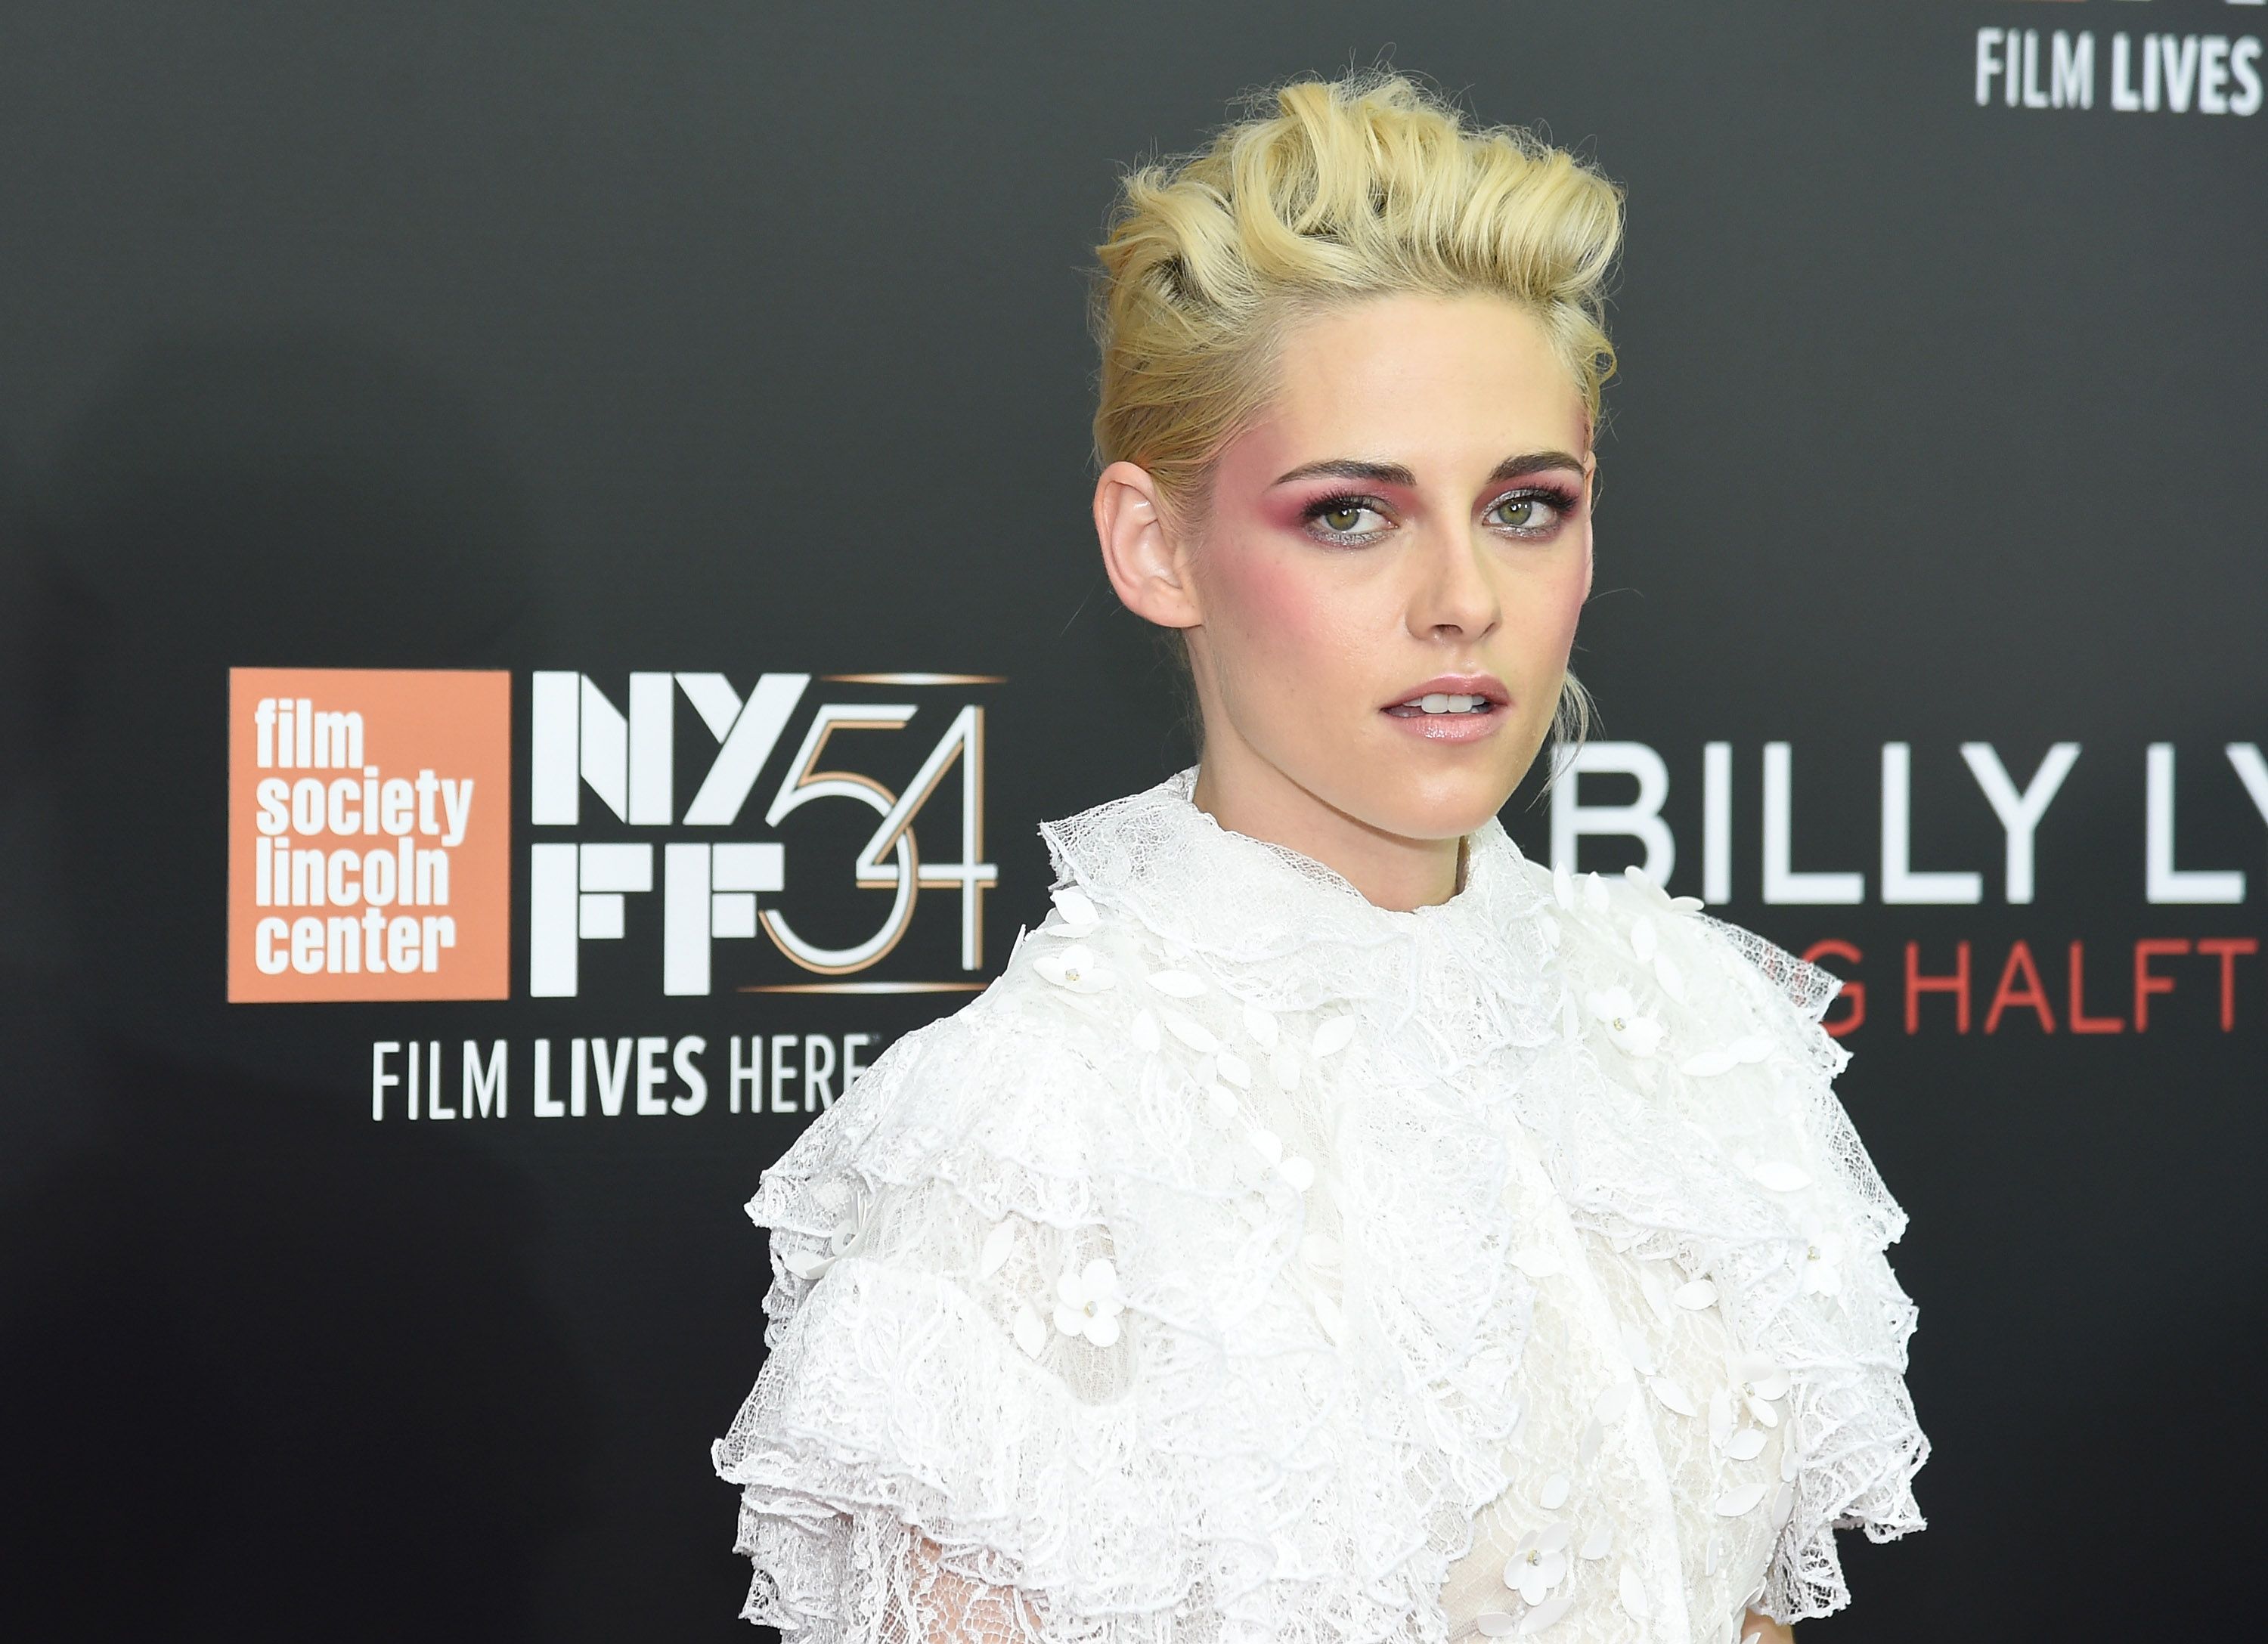 Kristen Stewart at "Billy Lynn's Long Halftime Walk" during the 54th New York Film Festival on October 14, 2016, in New York City | Photo: Jamie McCarthy/Getty Images